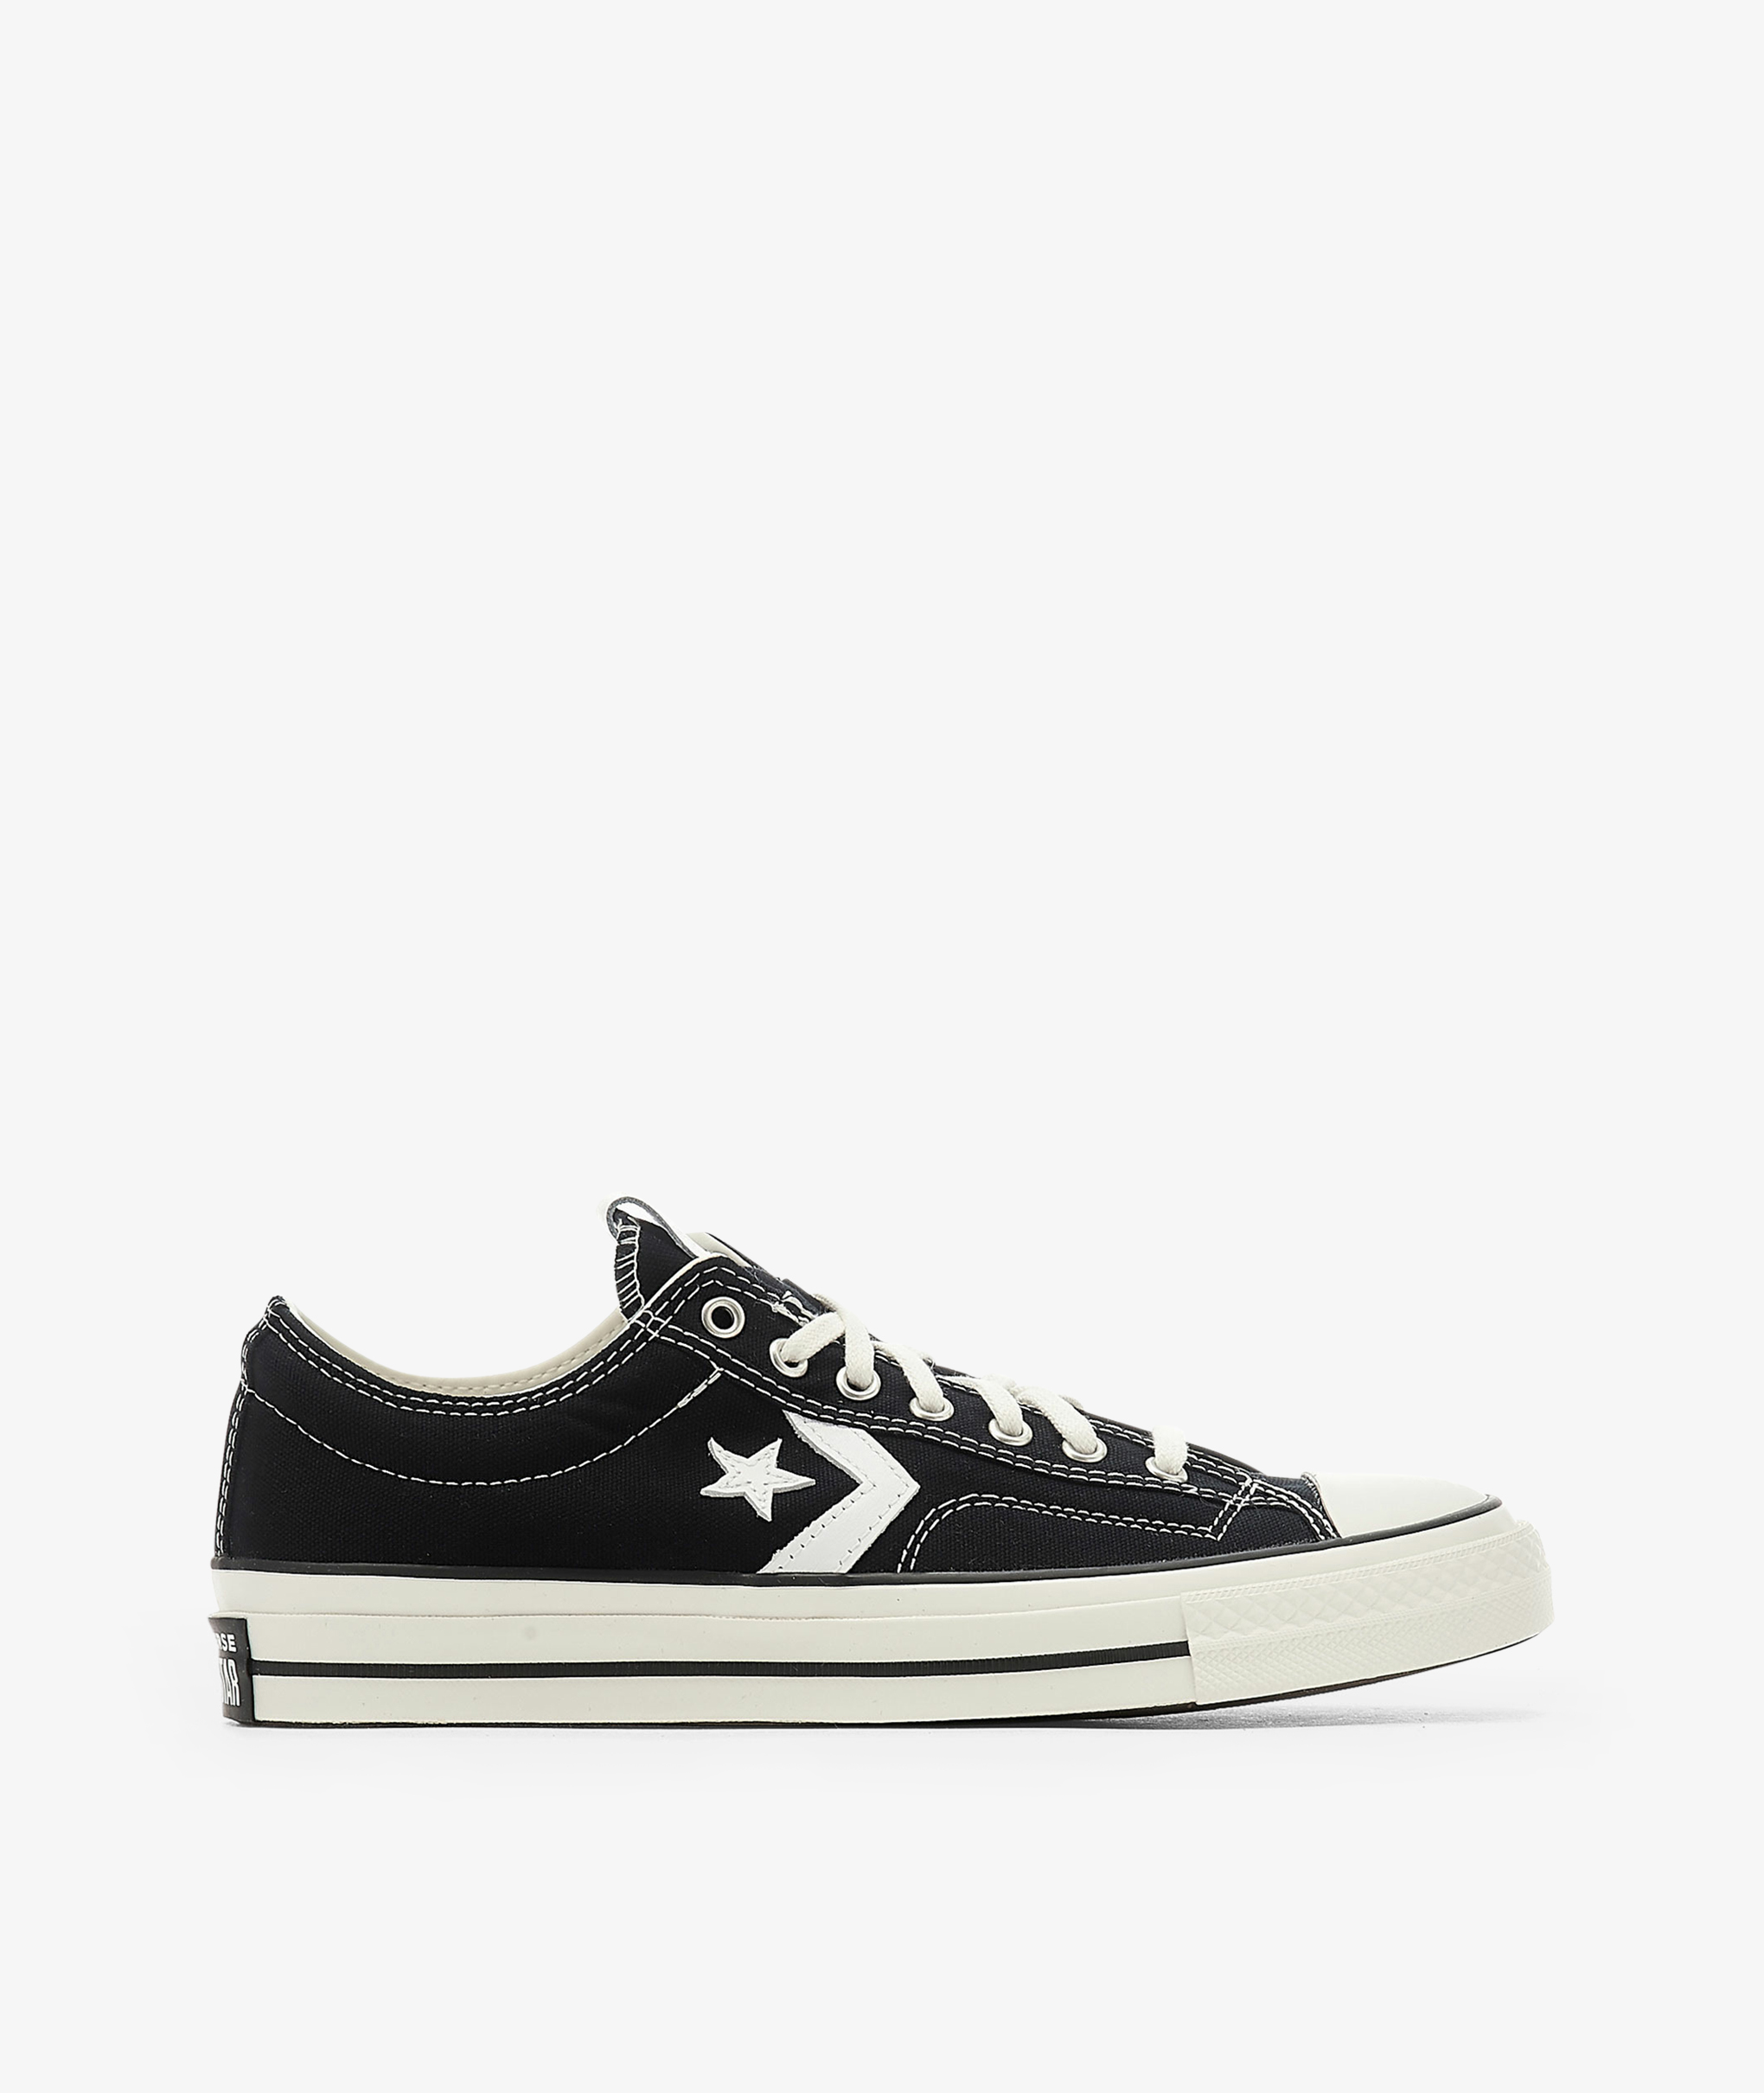 Ideal visto ropa Ejecutar Norse Store | Shipping Worldwide - Converse Star Player 76 OX - Black